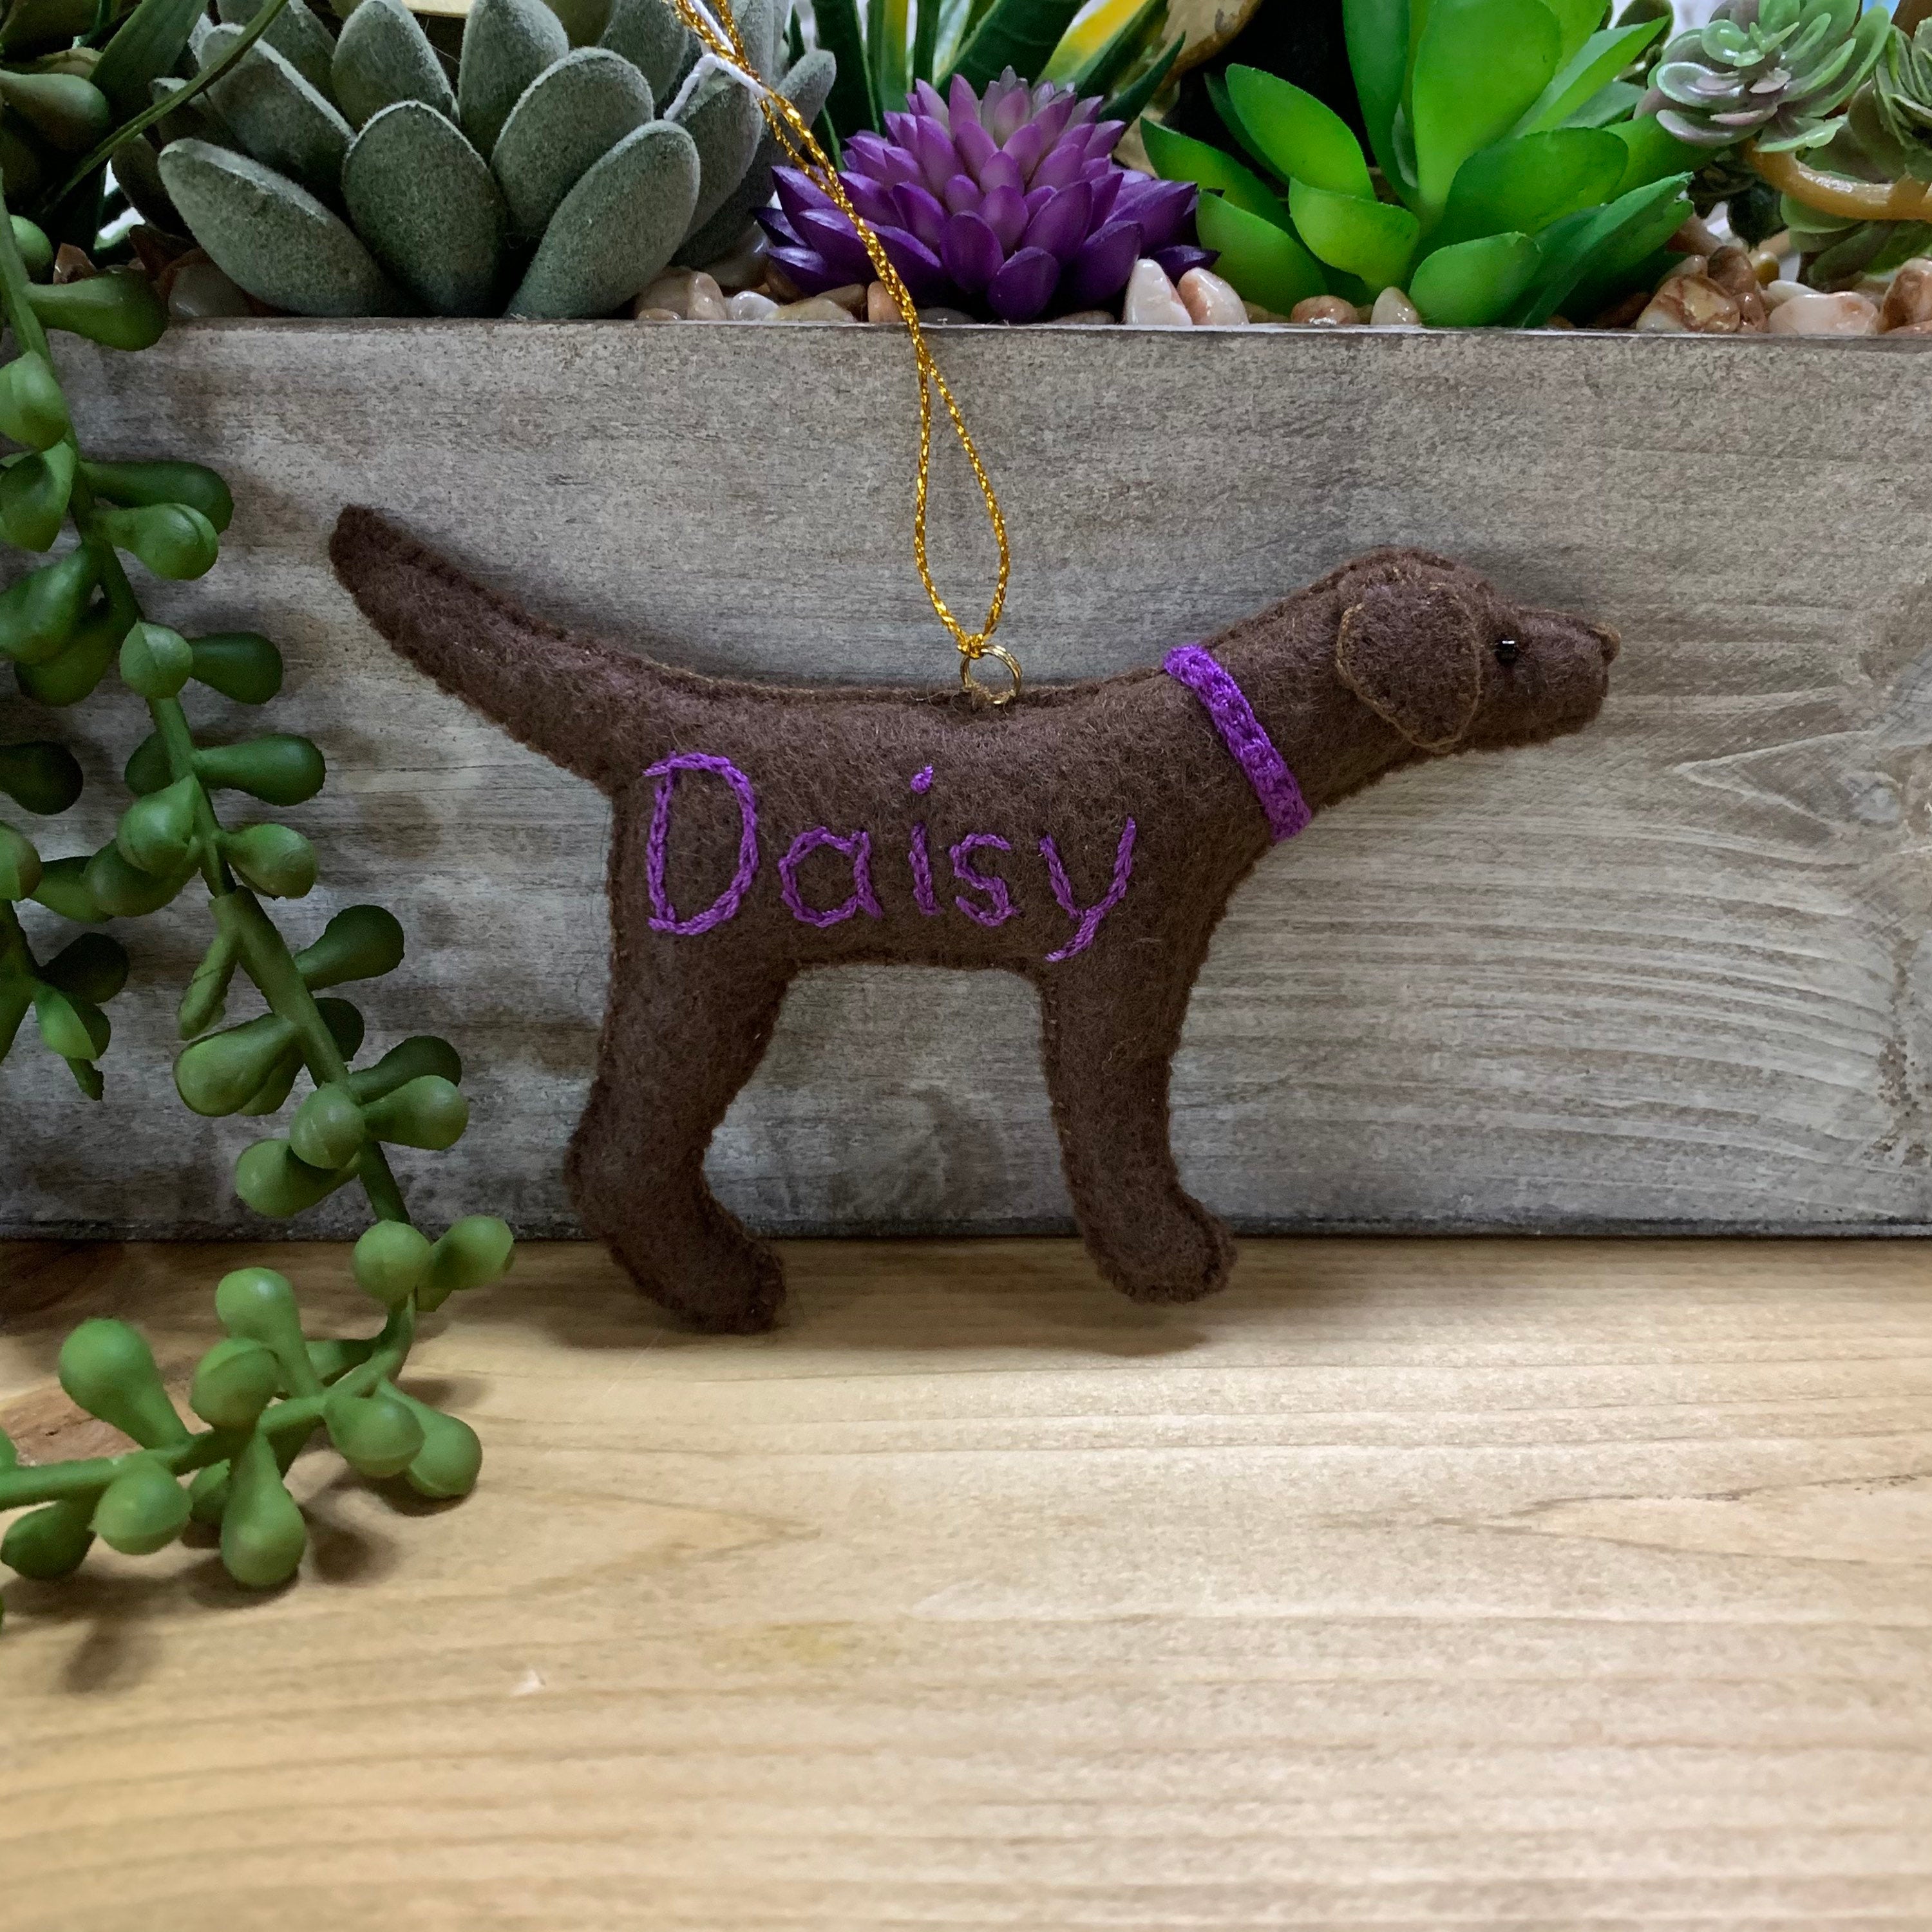 Personalized Red Fox Lab Ornament with a crochet collar